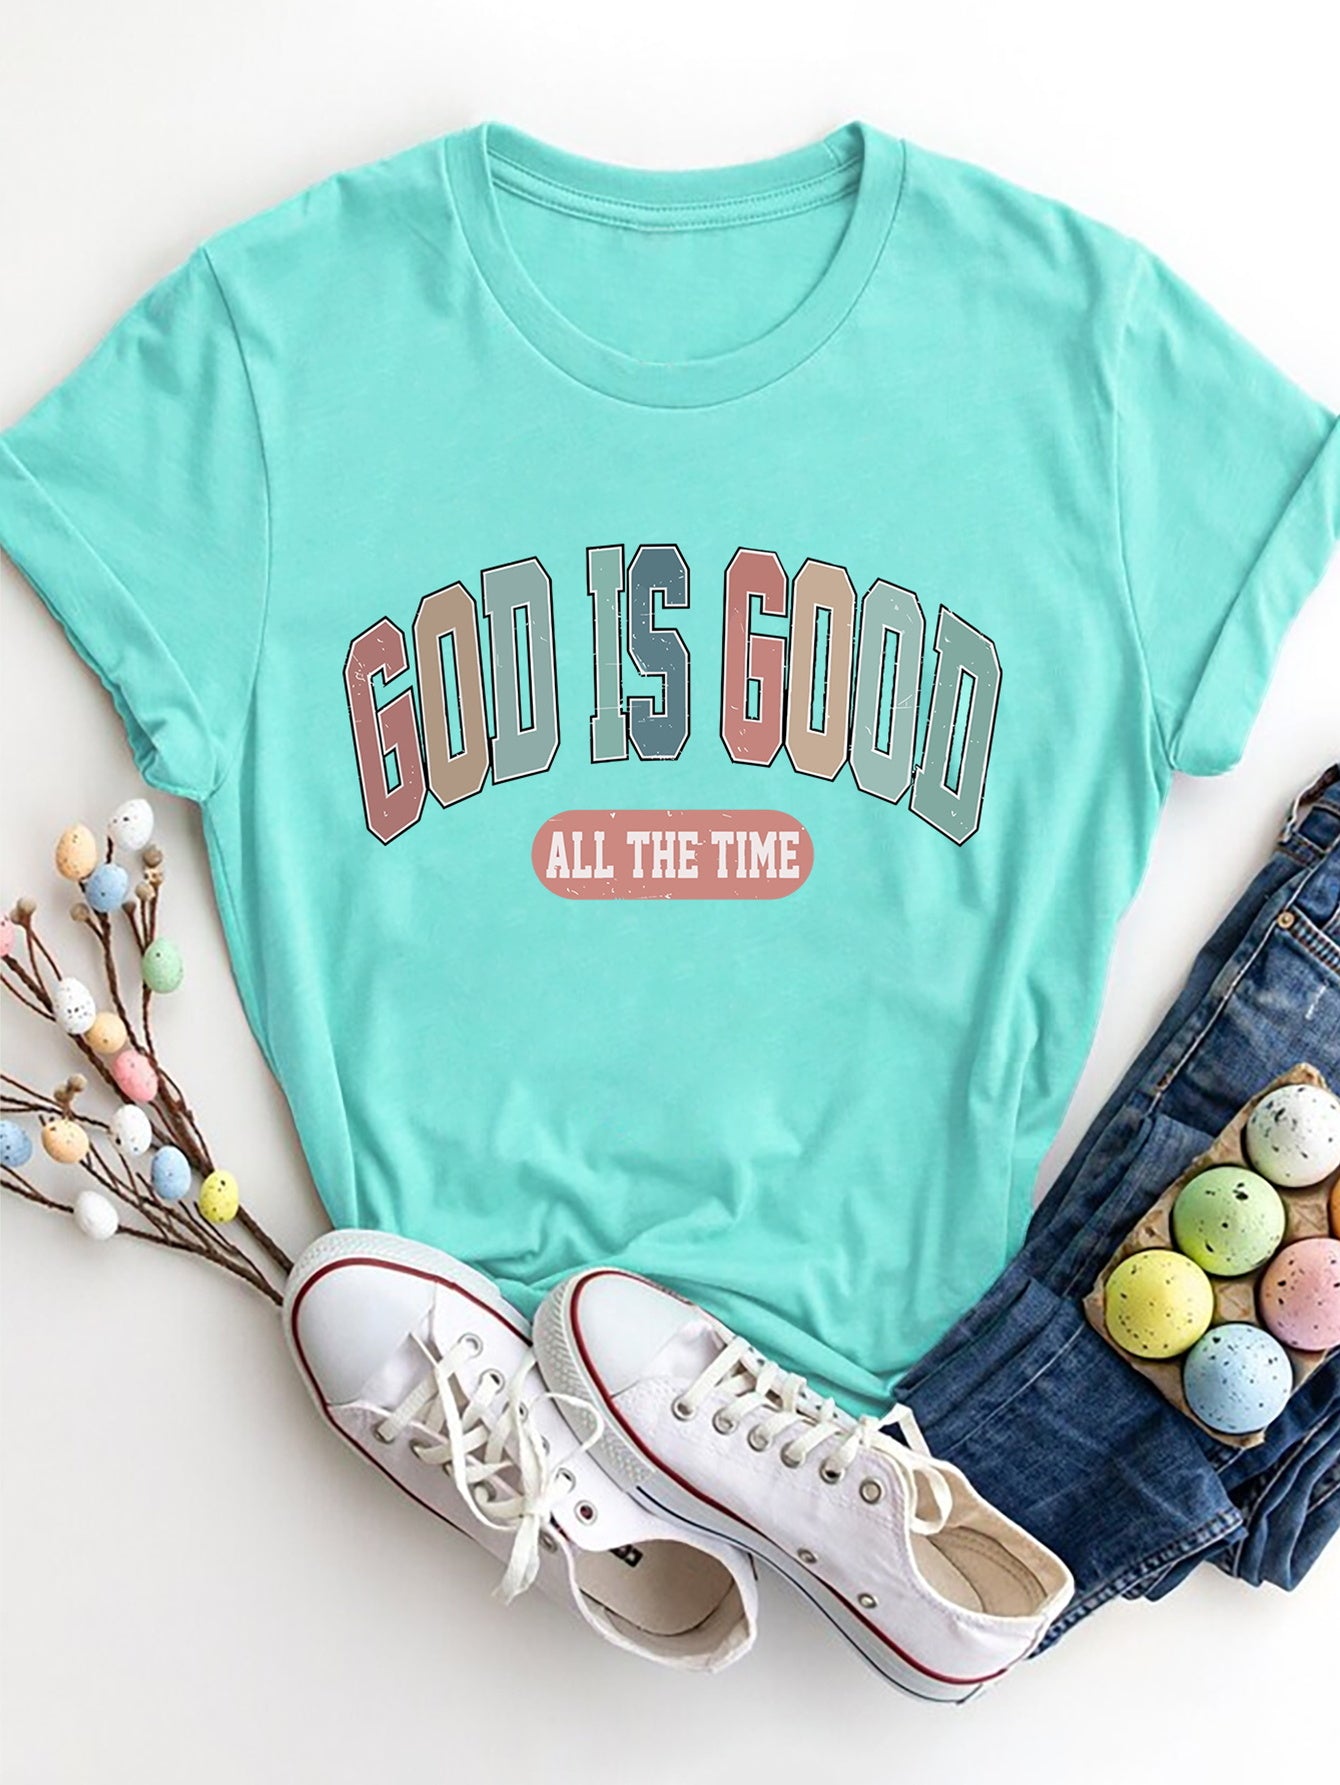 GOD IS GOOD ALL THE TIME Round Neck T-Shirt - Babbazon t-shirt